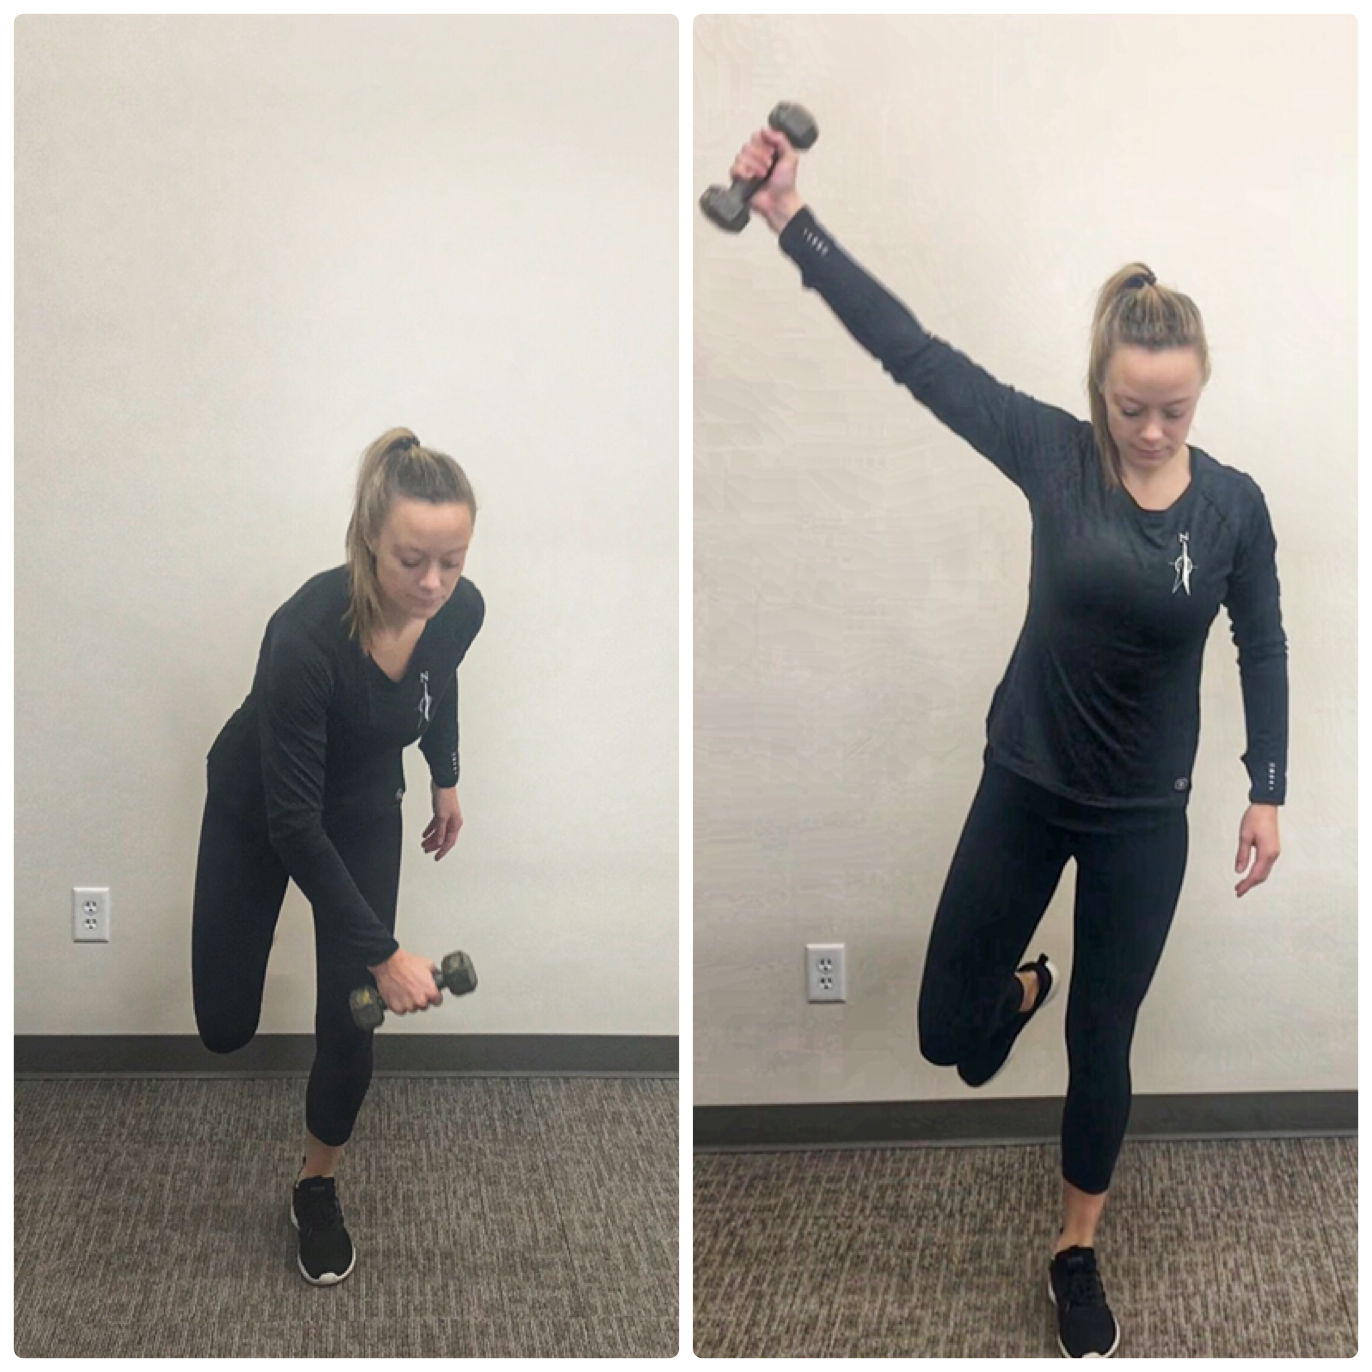 Balance on one leg with a weight in the other. Bend your knee into a squat and reach across your body, then straighten your knee and reach up and out. Repeat 15 time each leg.